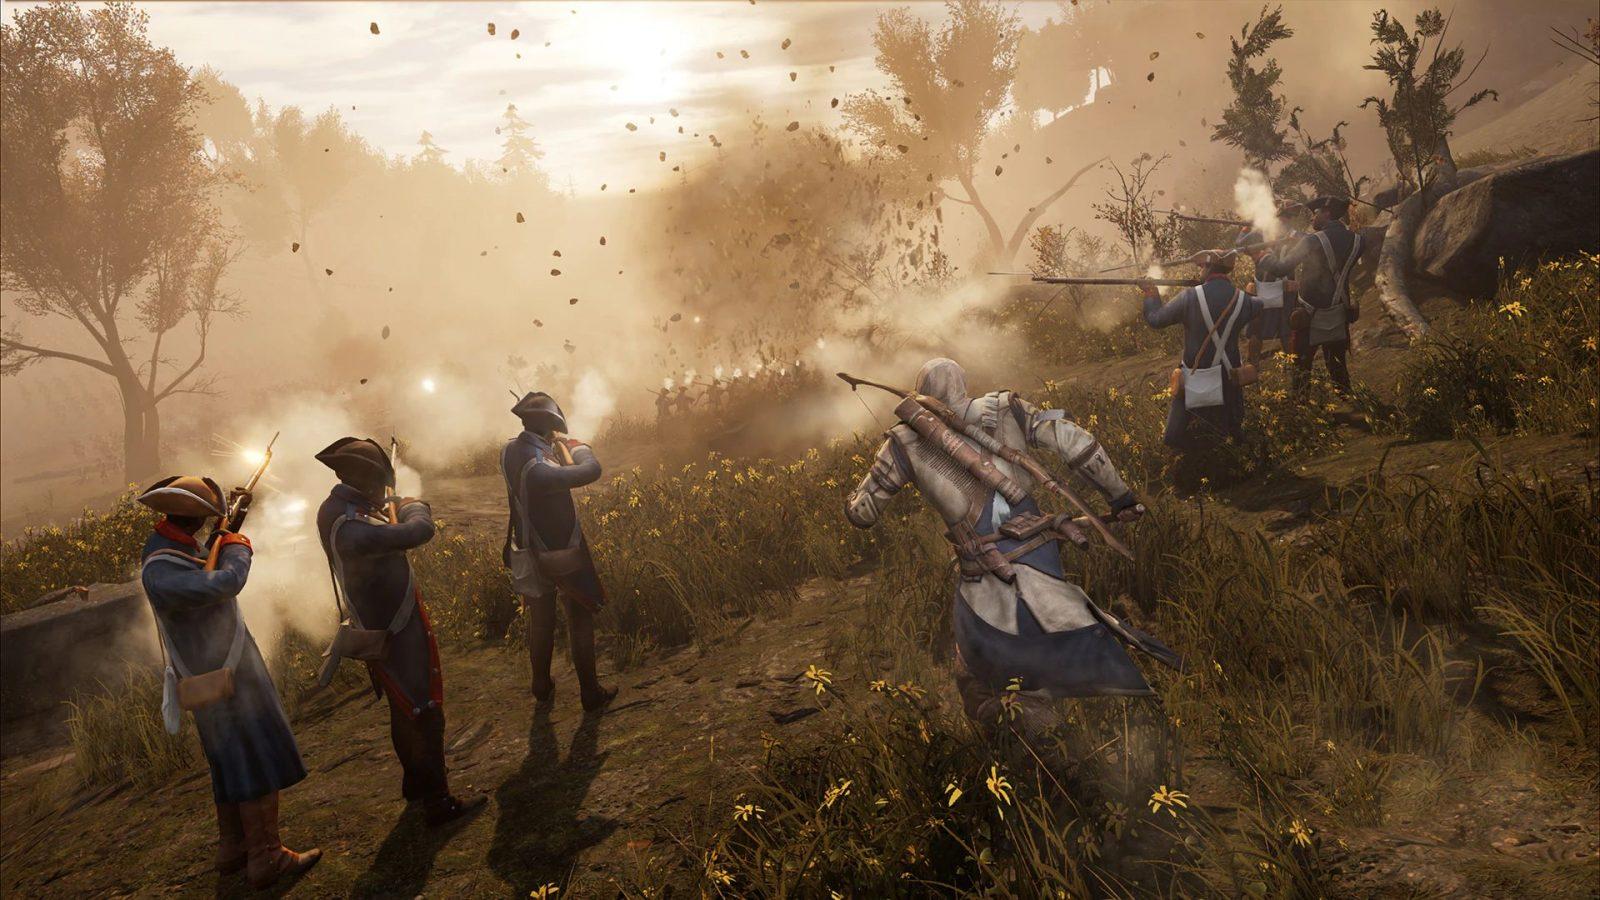 assassin's creed 3 battle going on